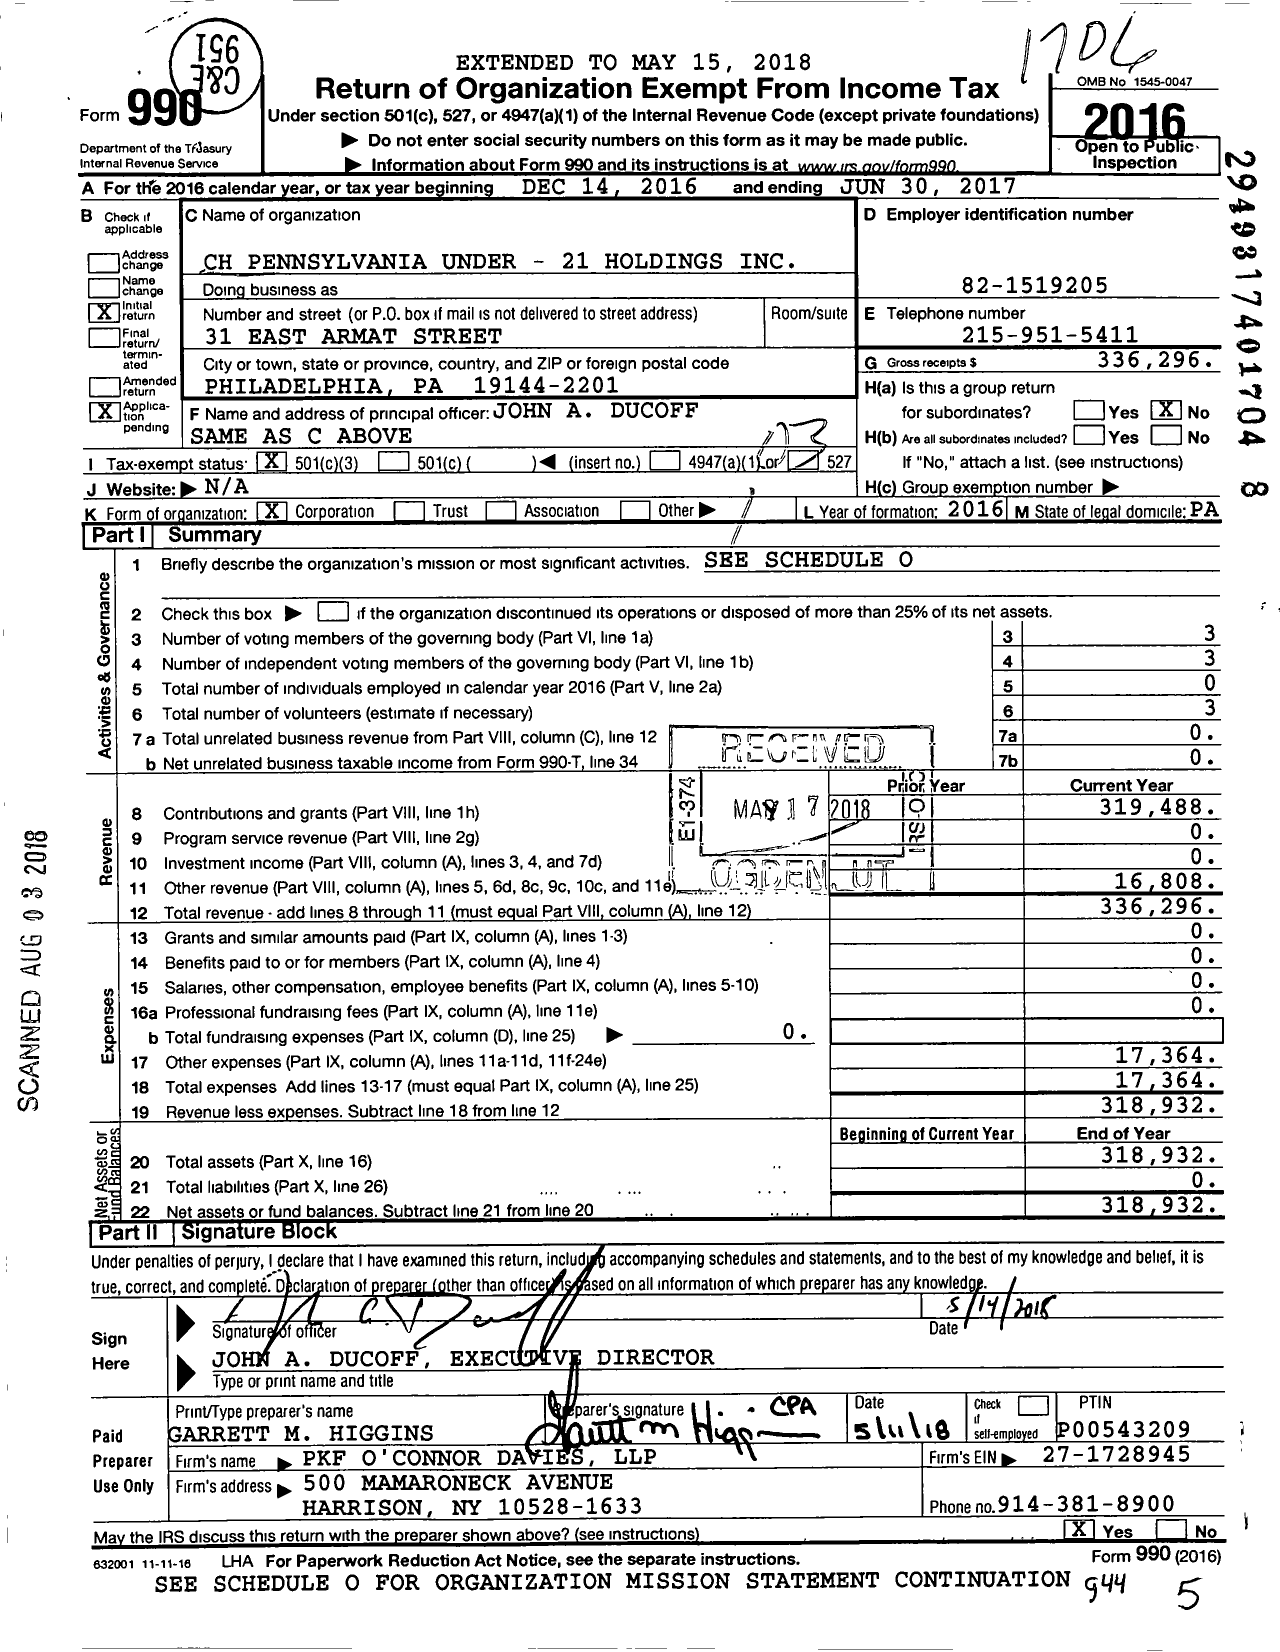 Image of first page of 2016 Form 990 for CH Pennsylvania Under - 21 Holdings